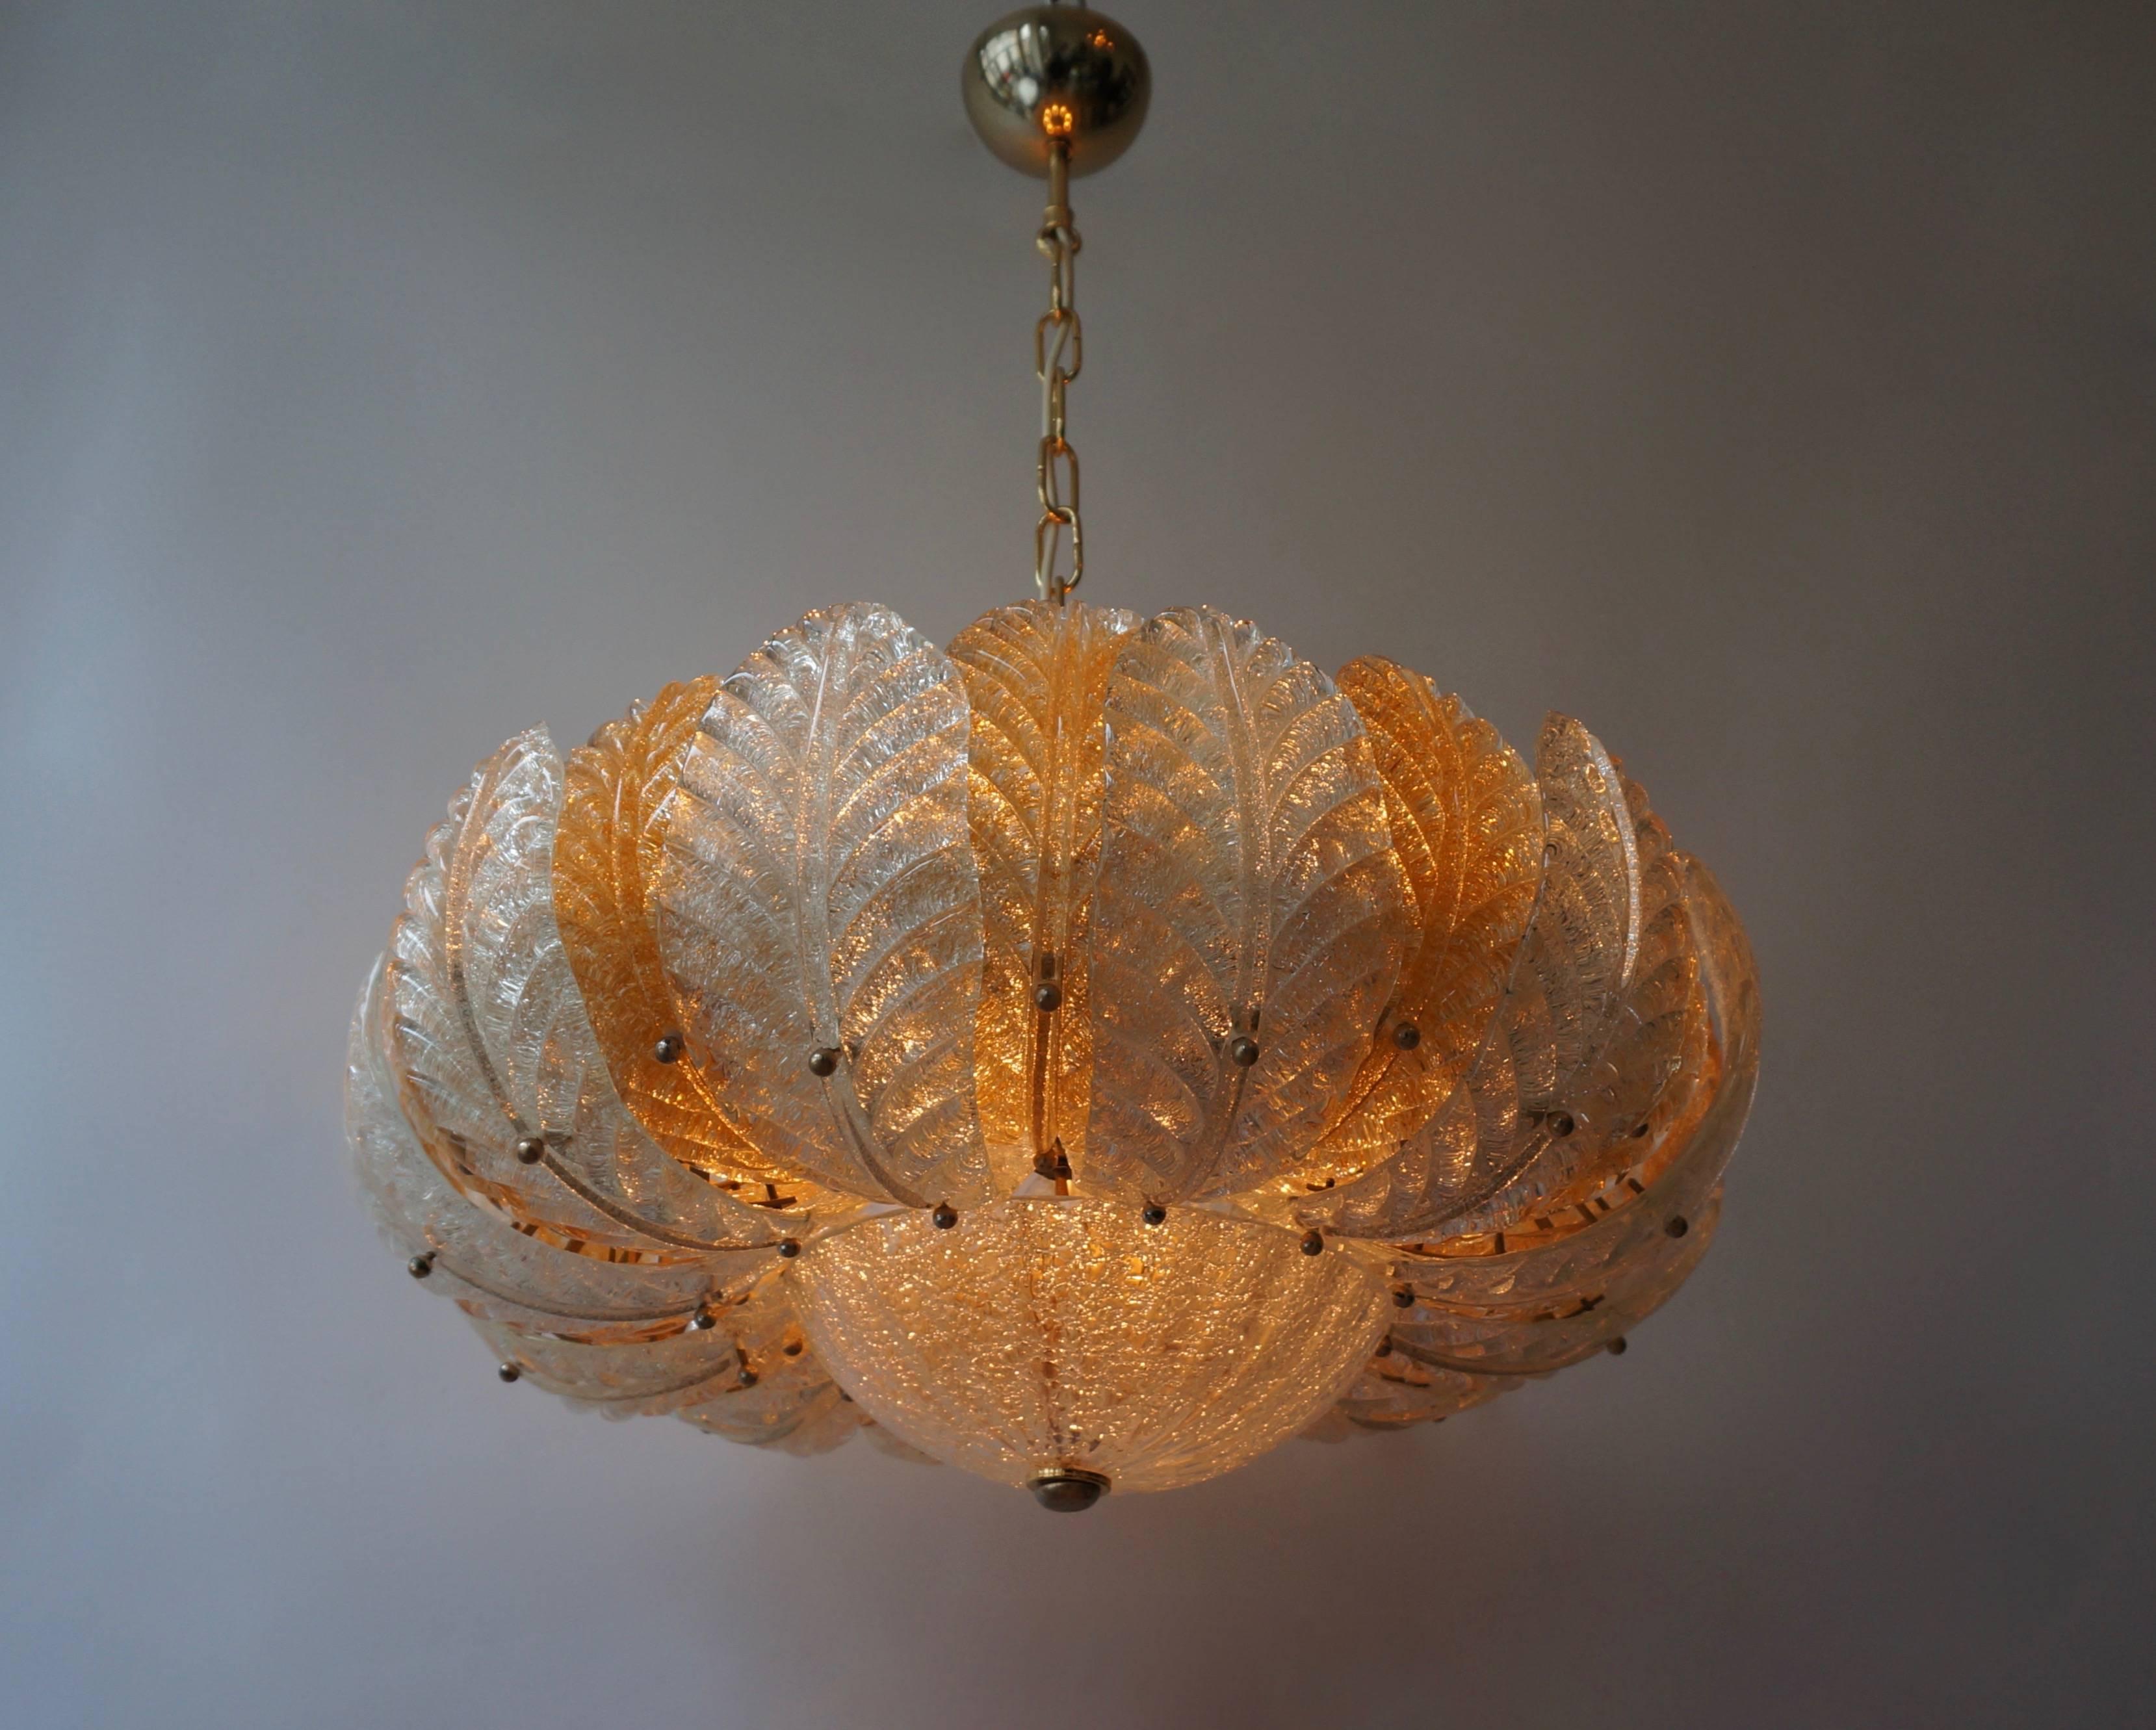 Italian chandelier with 24 Murano glass leaves.
Total height with the chain is 75 cm,
Diameter: 64 cm.
Eight E14 bulbs.